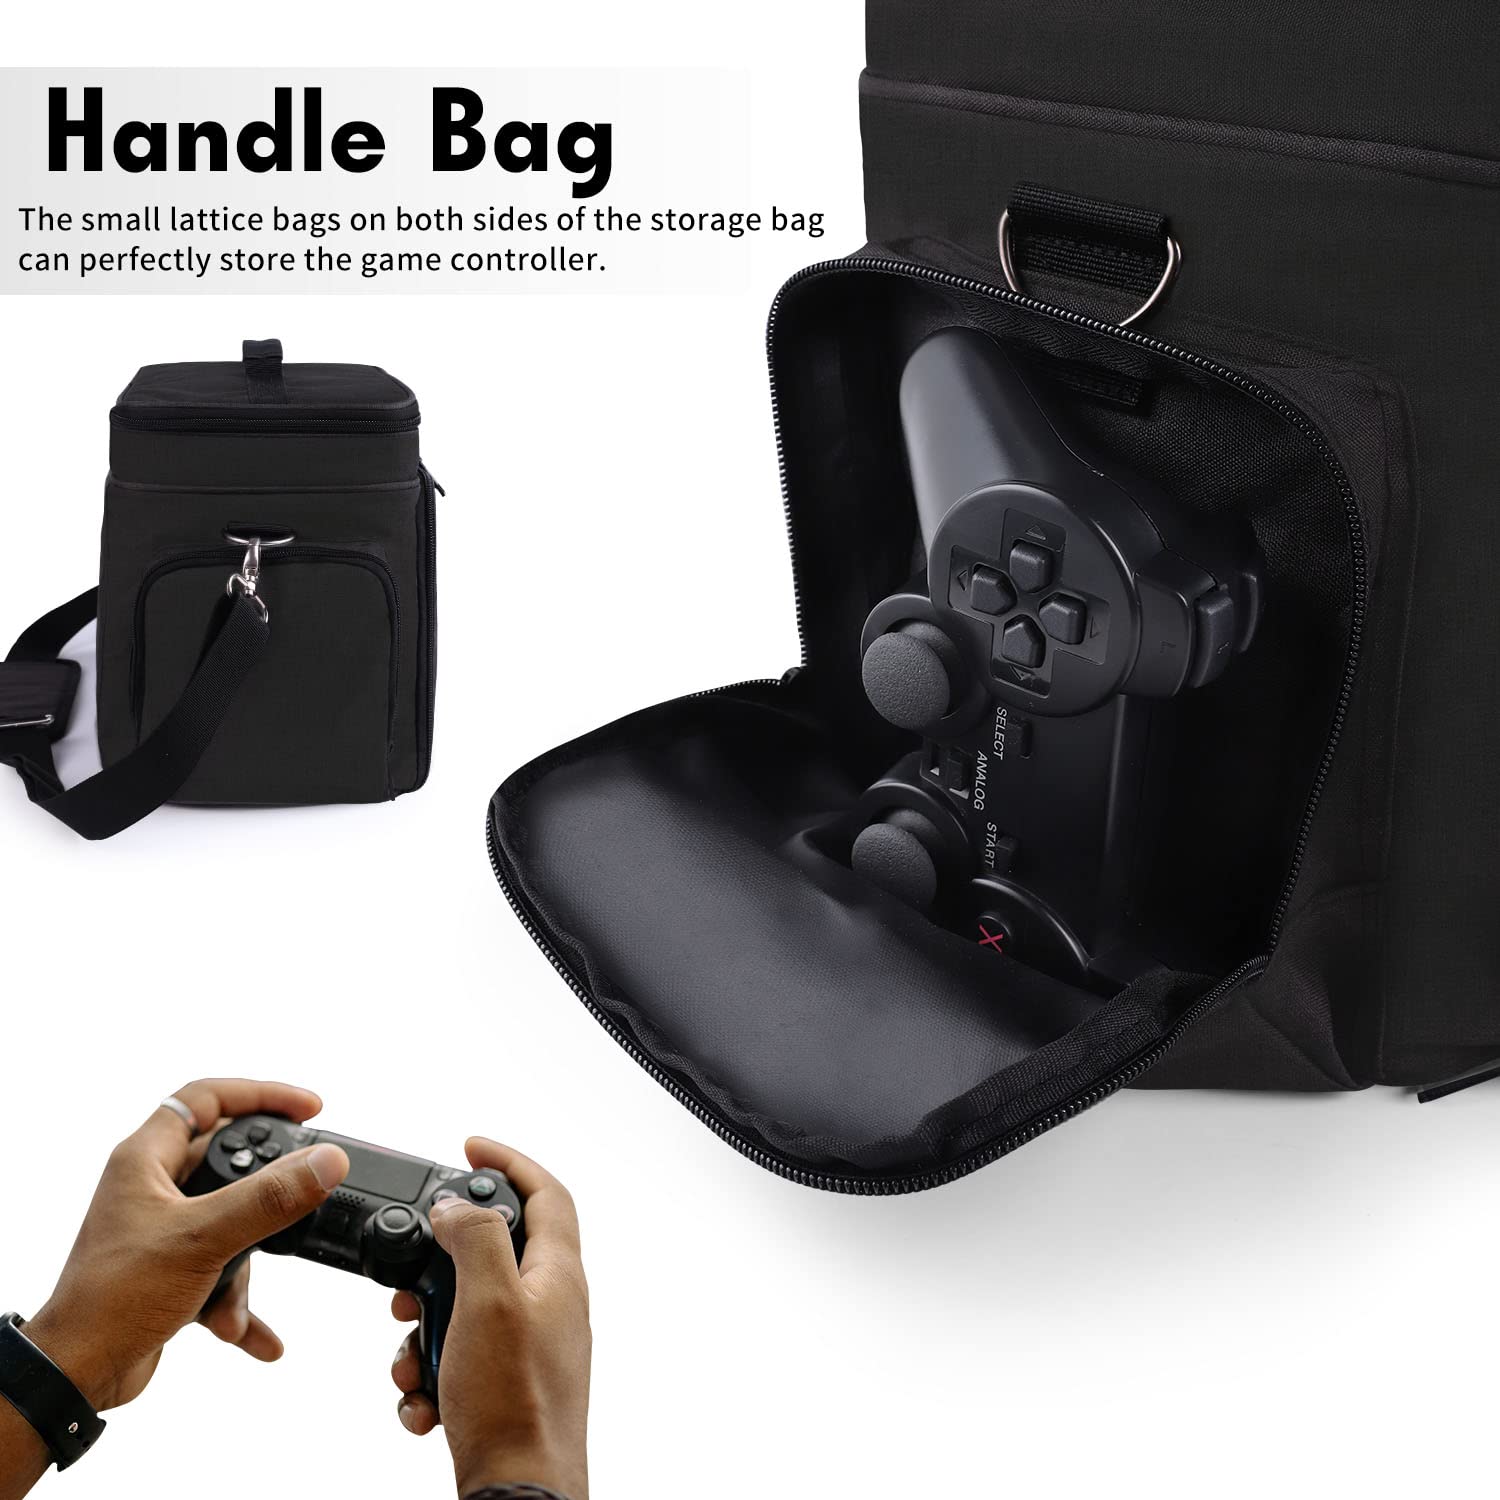 Portable Nintendo Switch Case Large Carrying Storage Bag Compatible with Nintendo Switch/Switch OLED/ Switch Lite, Soft Lining Hard Case for Nintendo Switch Console Pro Controller & Accessories